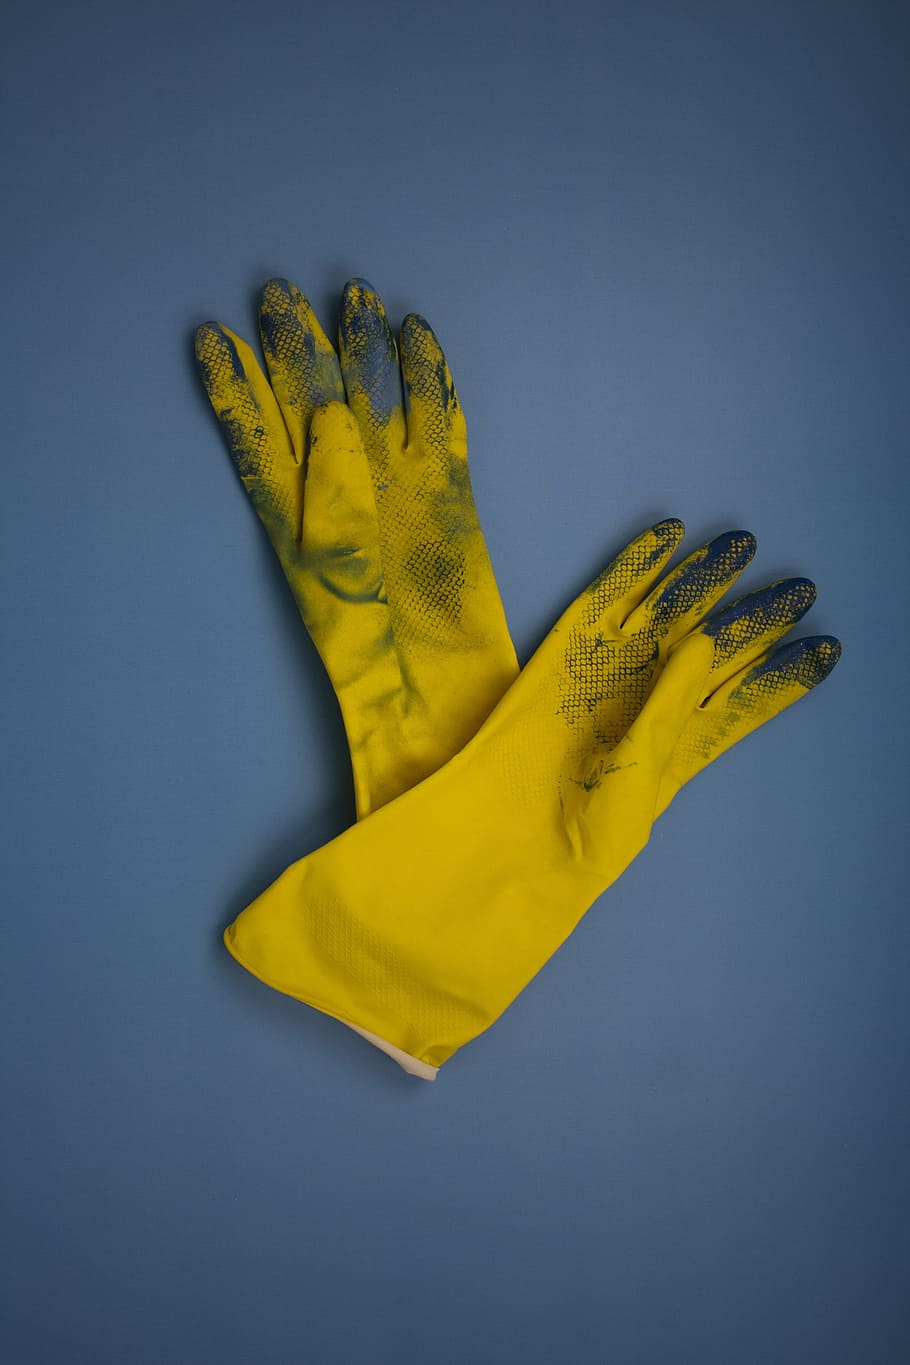 gloves, work, yellow, dirty, protection, hand, working, protective, protect, gardening